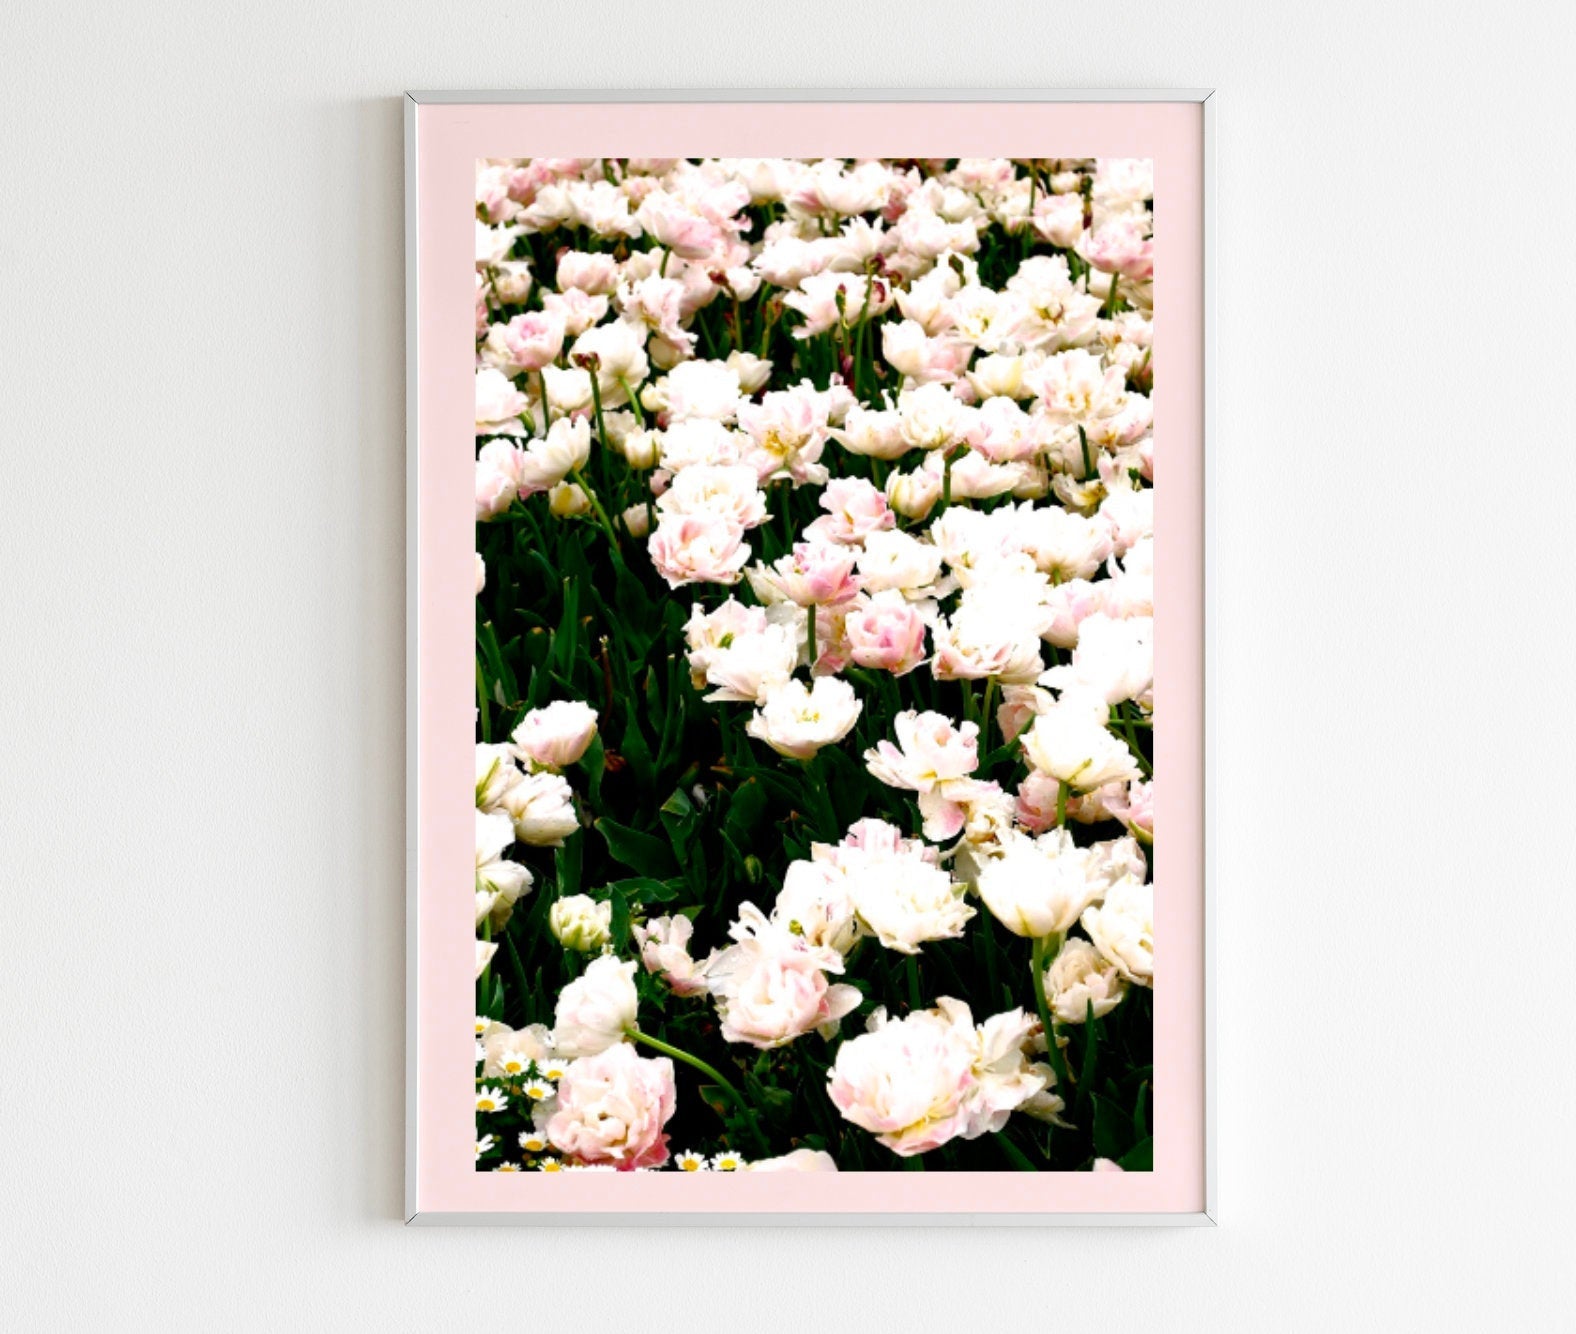 Floriade Blush Pink Tulips in Bloom • Canberra Photography Print